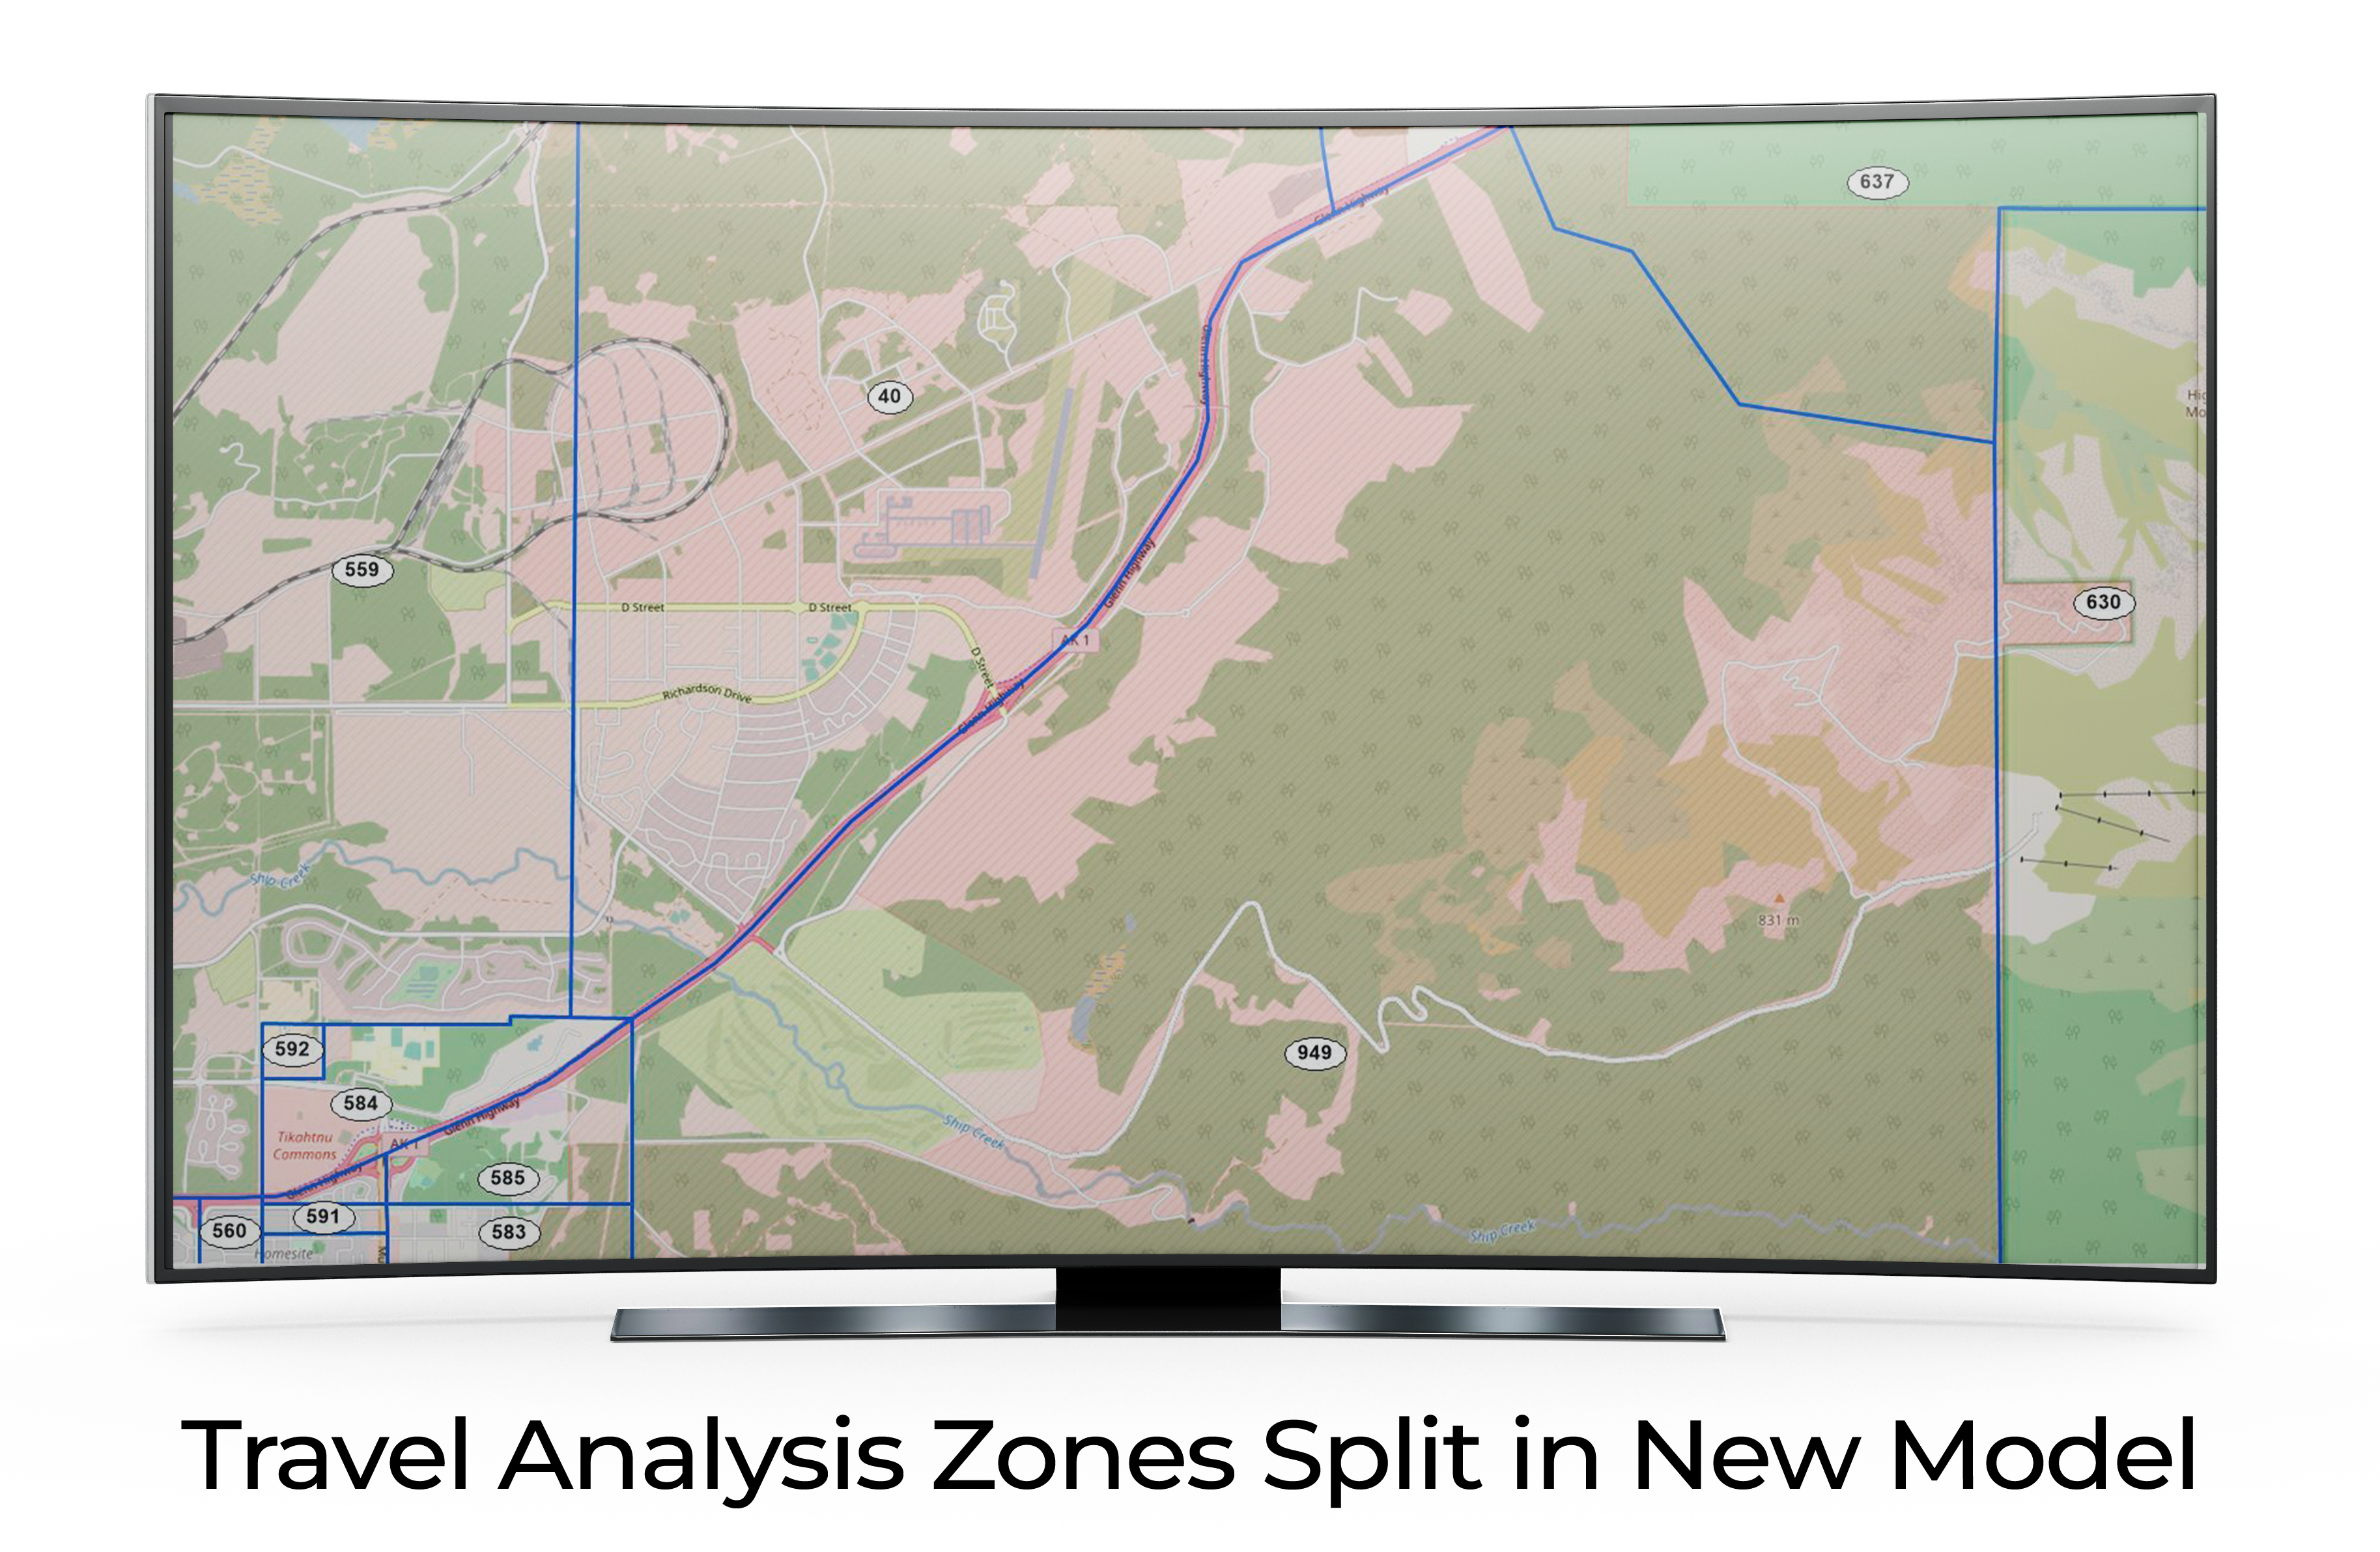 Detailed map showcasing the Travel Analysis Zones with numbered zones and distinct roadways, split in a new modeling format.